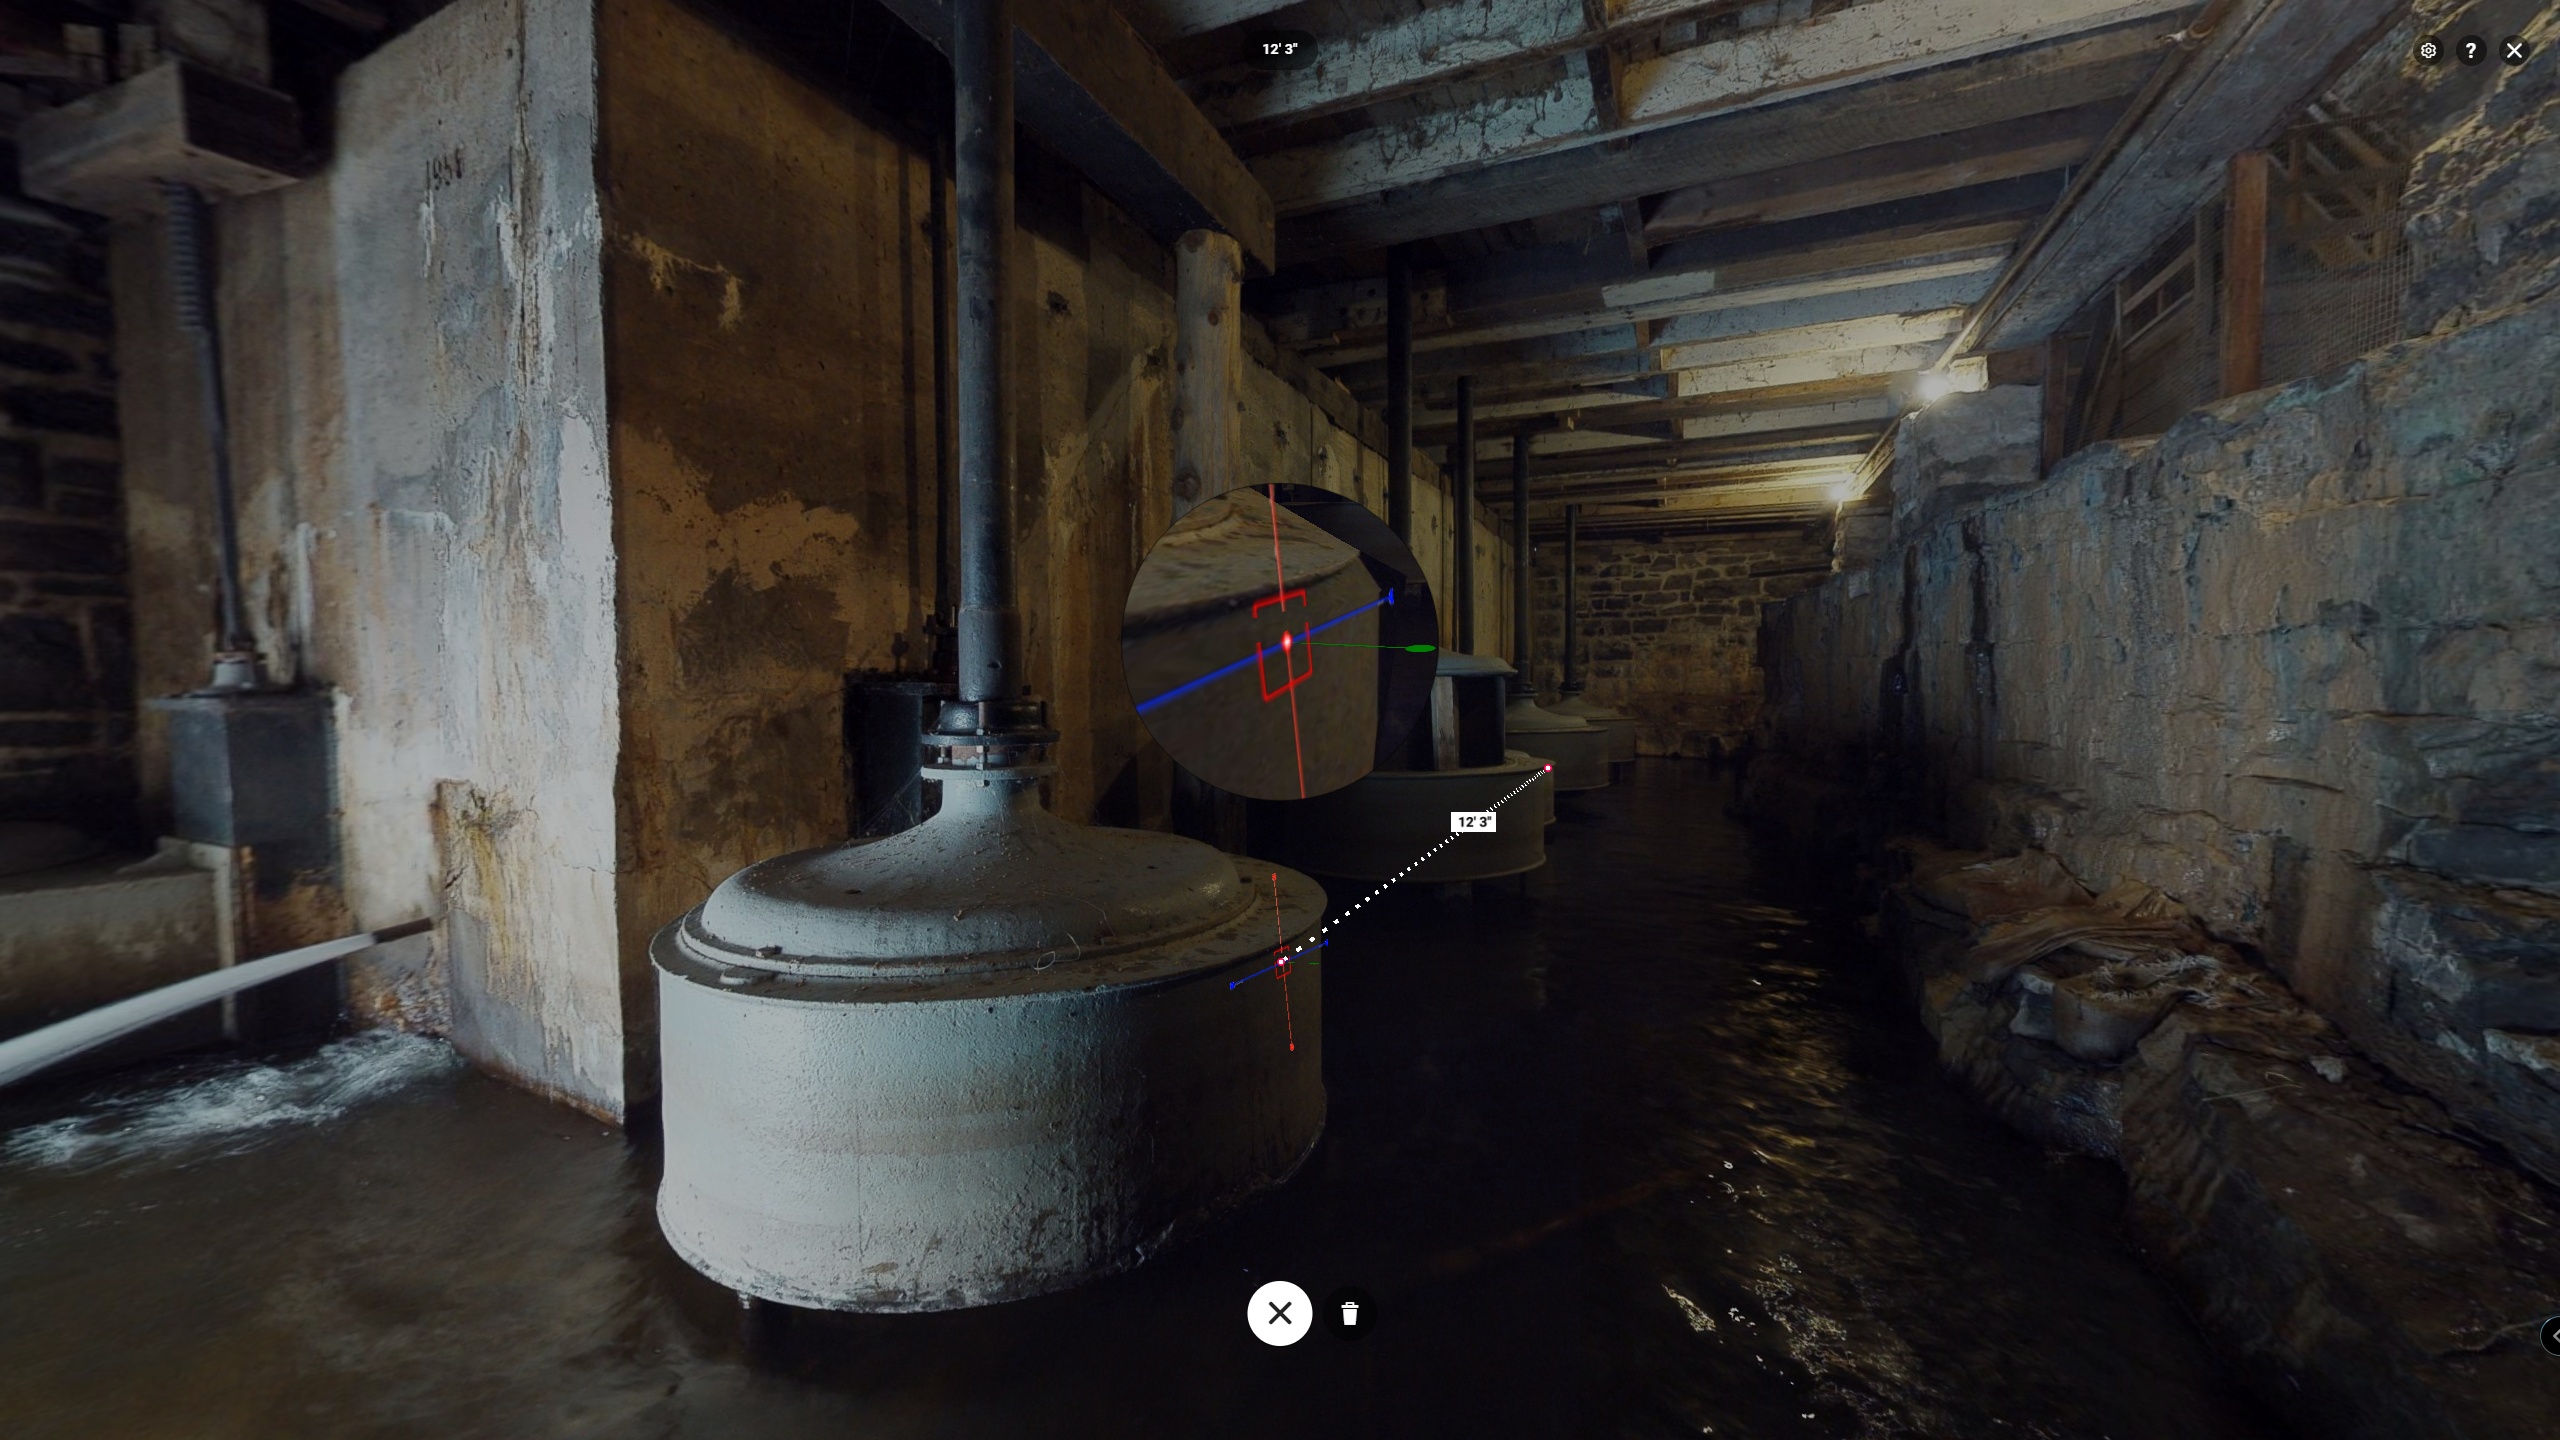 View dangerous areas remotely with 3D Tours